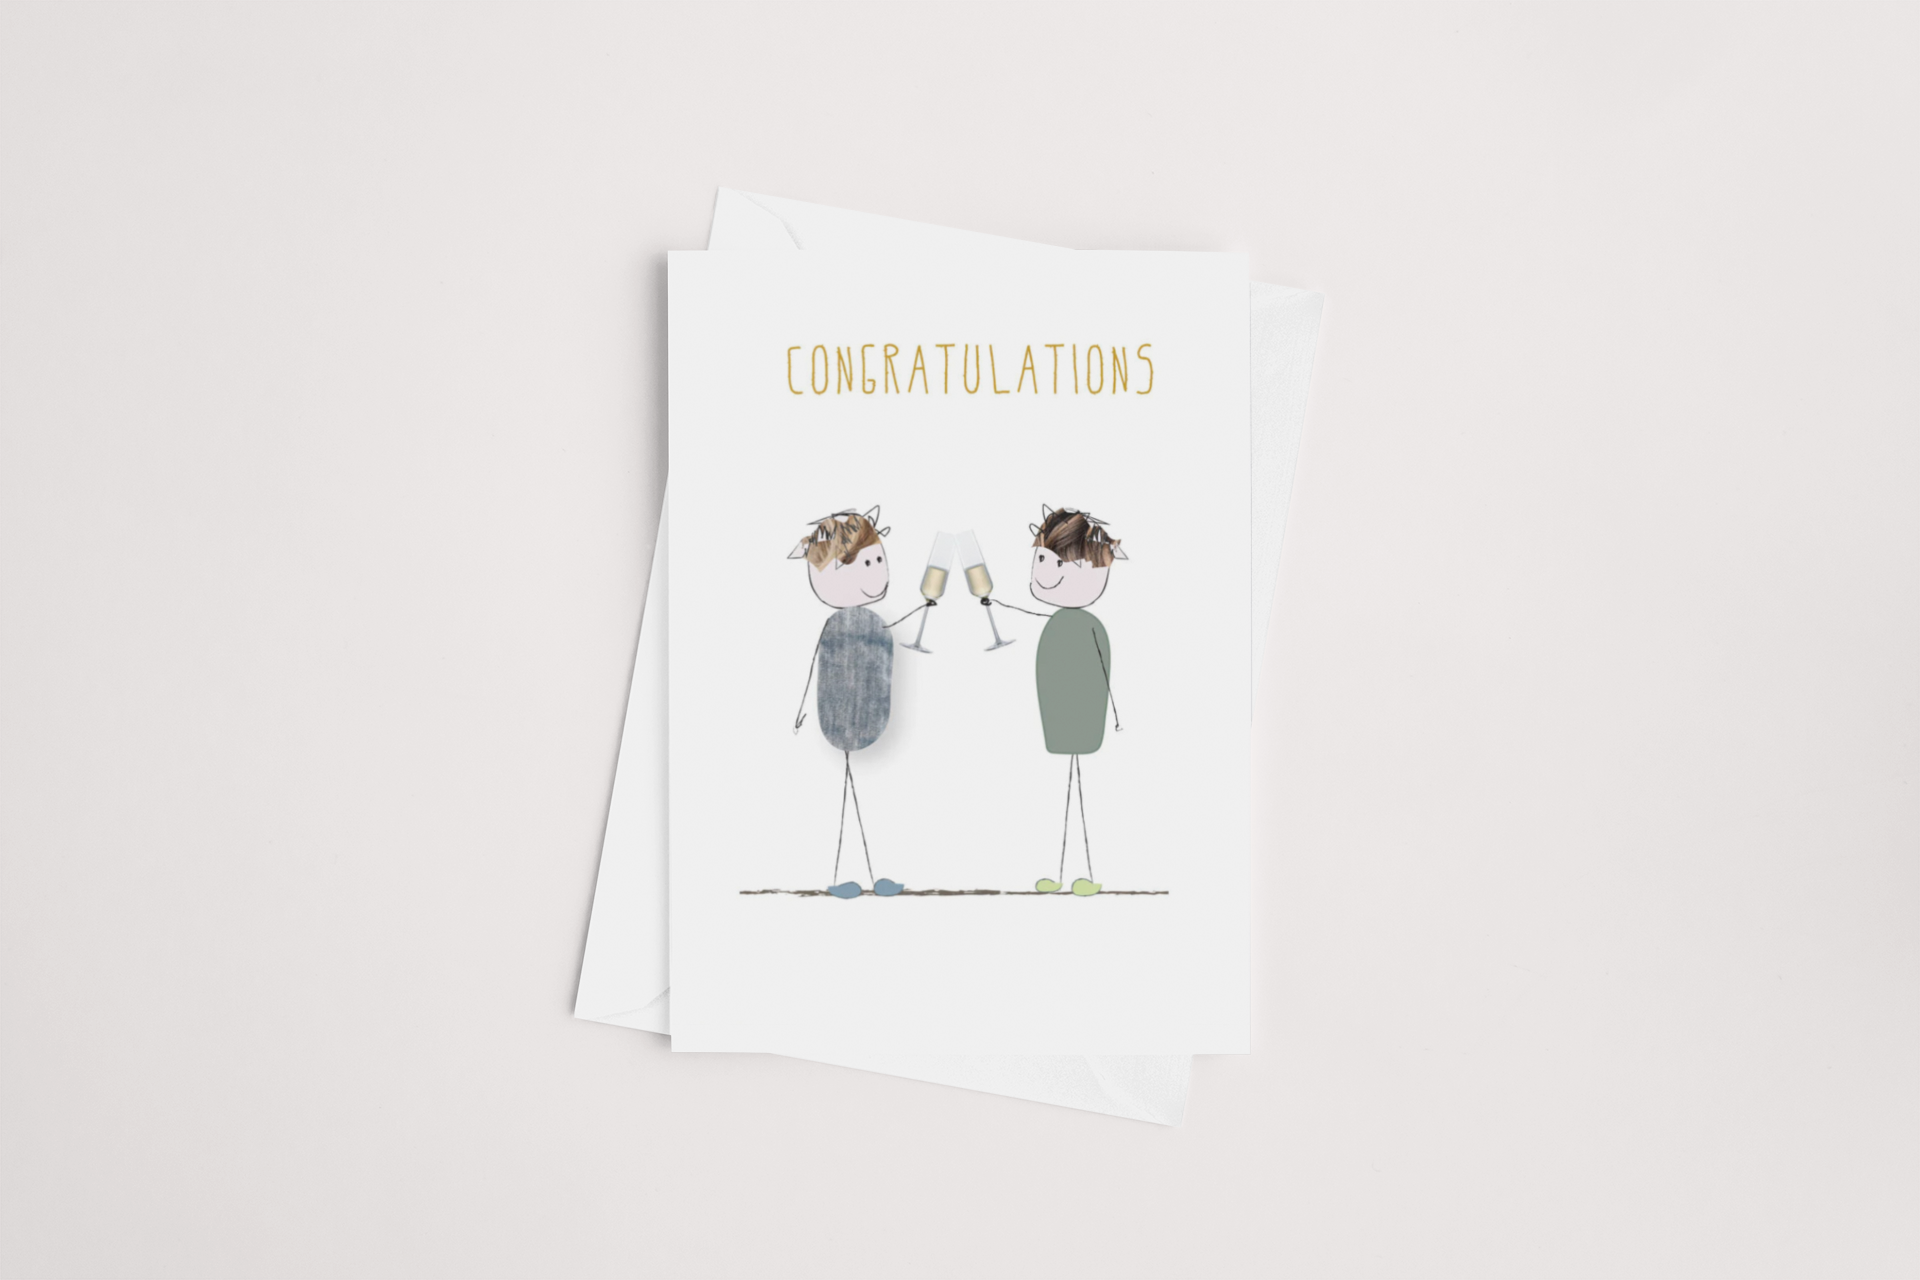 A icandy Champagne Congratulations Card with an illustration of two cheerful animated characters and the word "congratulations" above them, set against a clean white background. This Product of New Zealand is part of our Mult